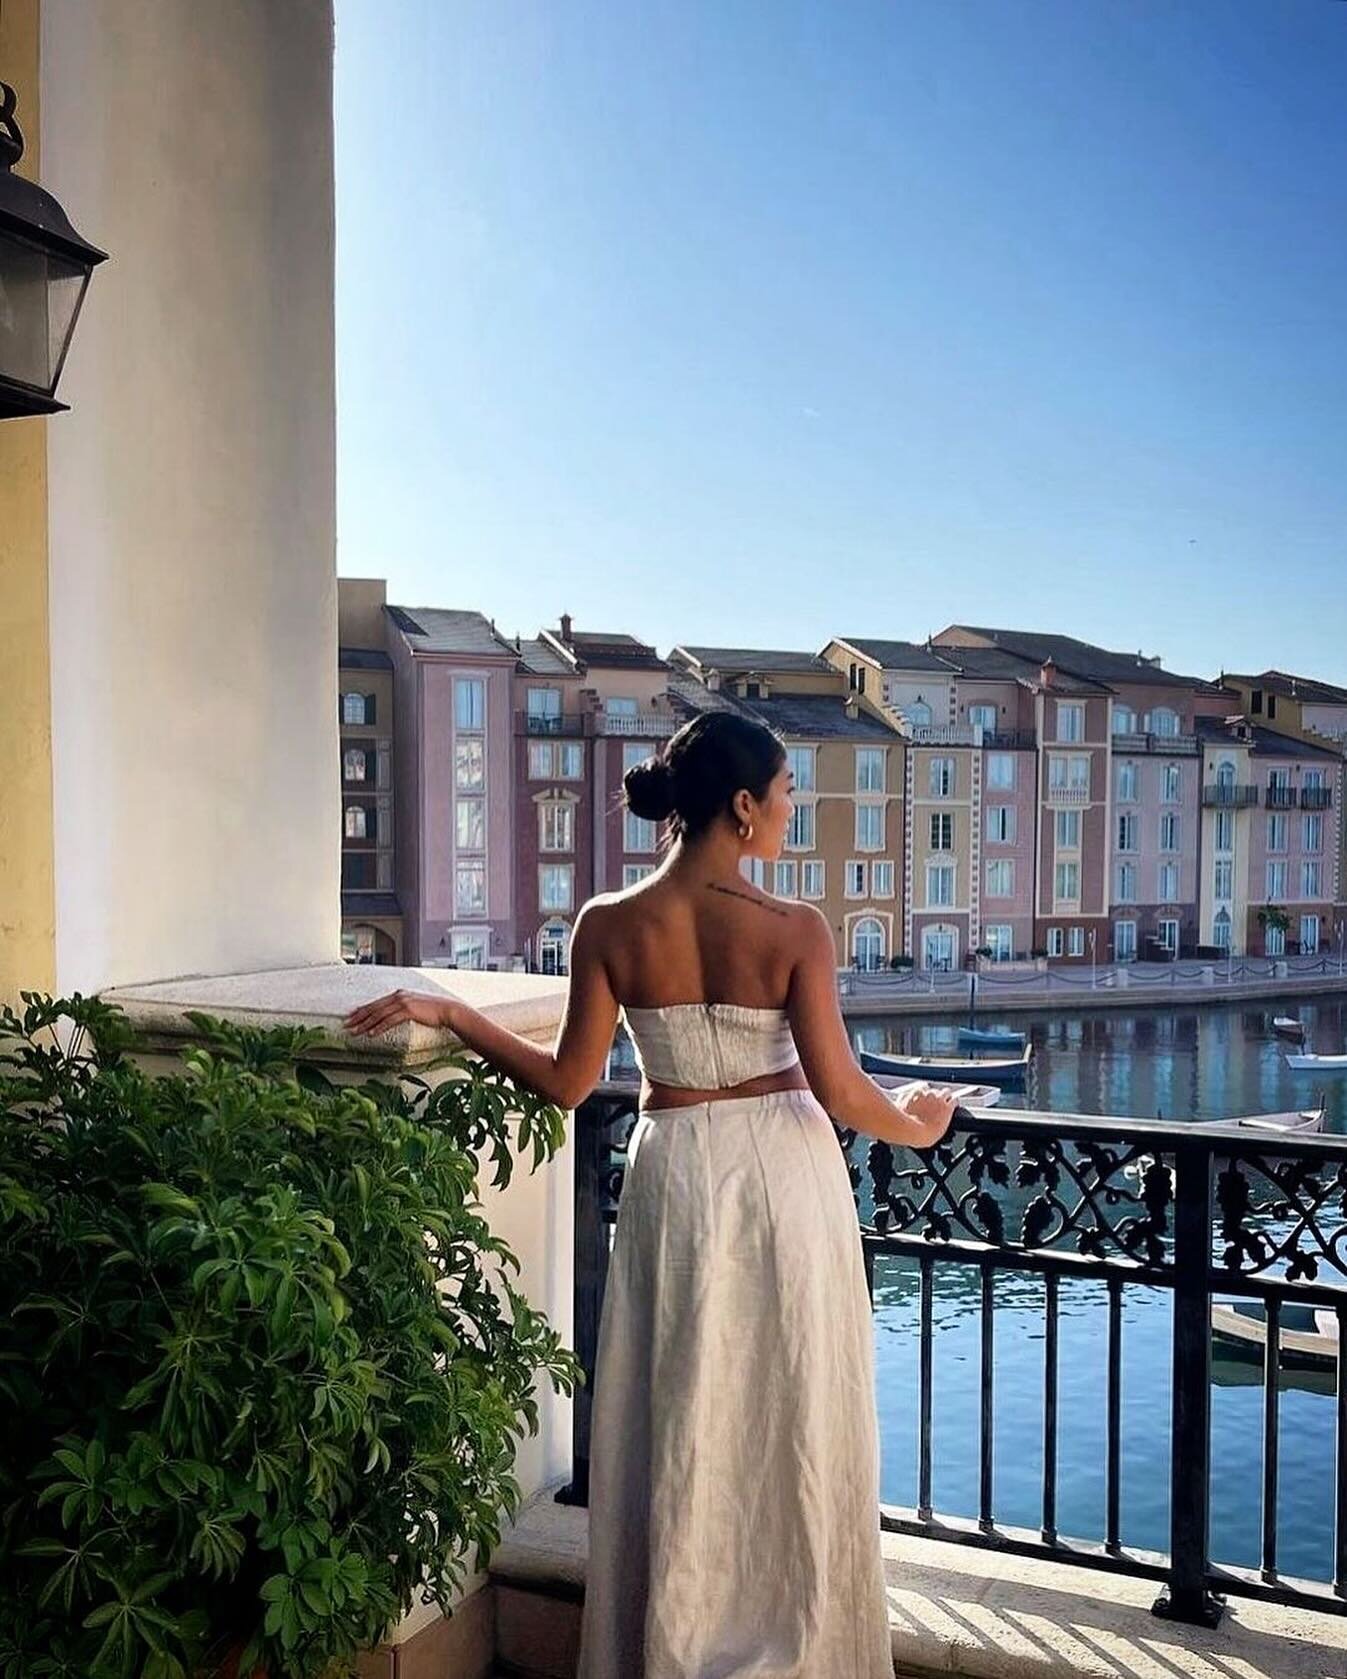 Missing Italy 🇮🇹 but finding a slice of it right here at @universalorlando&rsquo;s Portofino Bay, thanks to 📸 @jeannine.roxas ✨

With its picturesque views and enchanting ambiance, it&rsquo;s almost like being transported to Italy itself. #loewspo